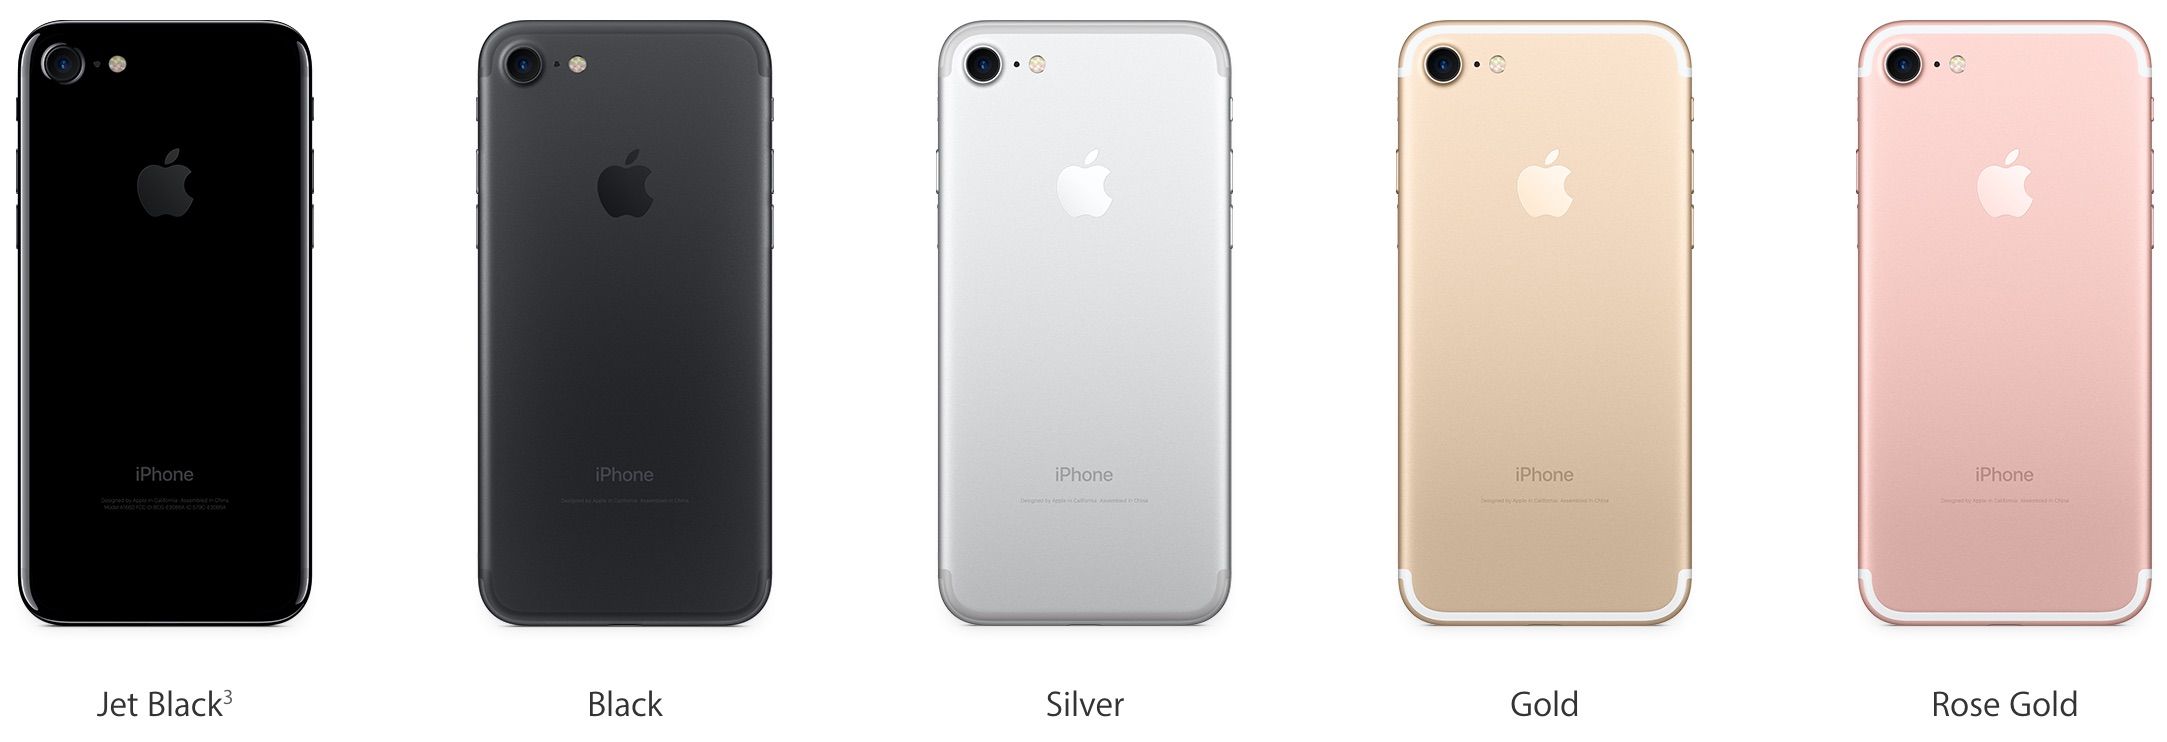 Apple's iPhone 7 finally gets a release date